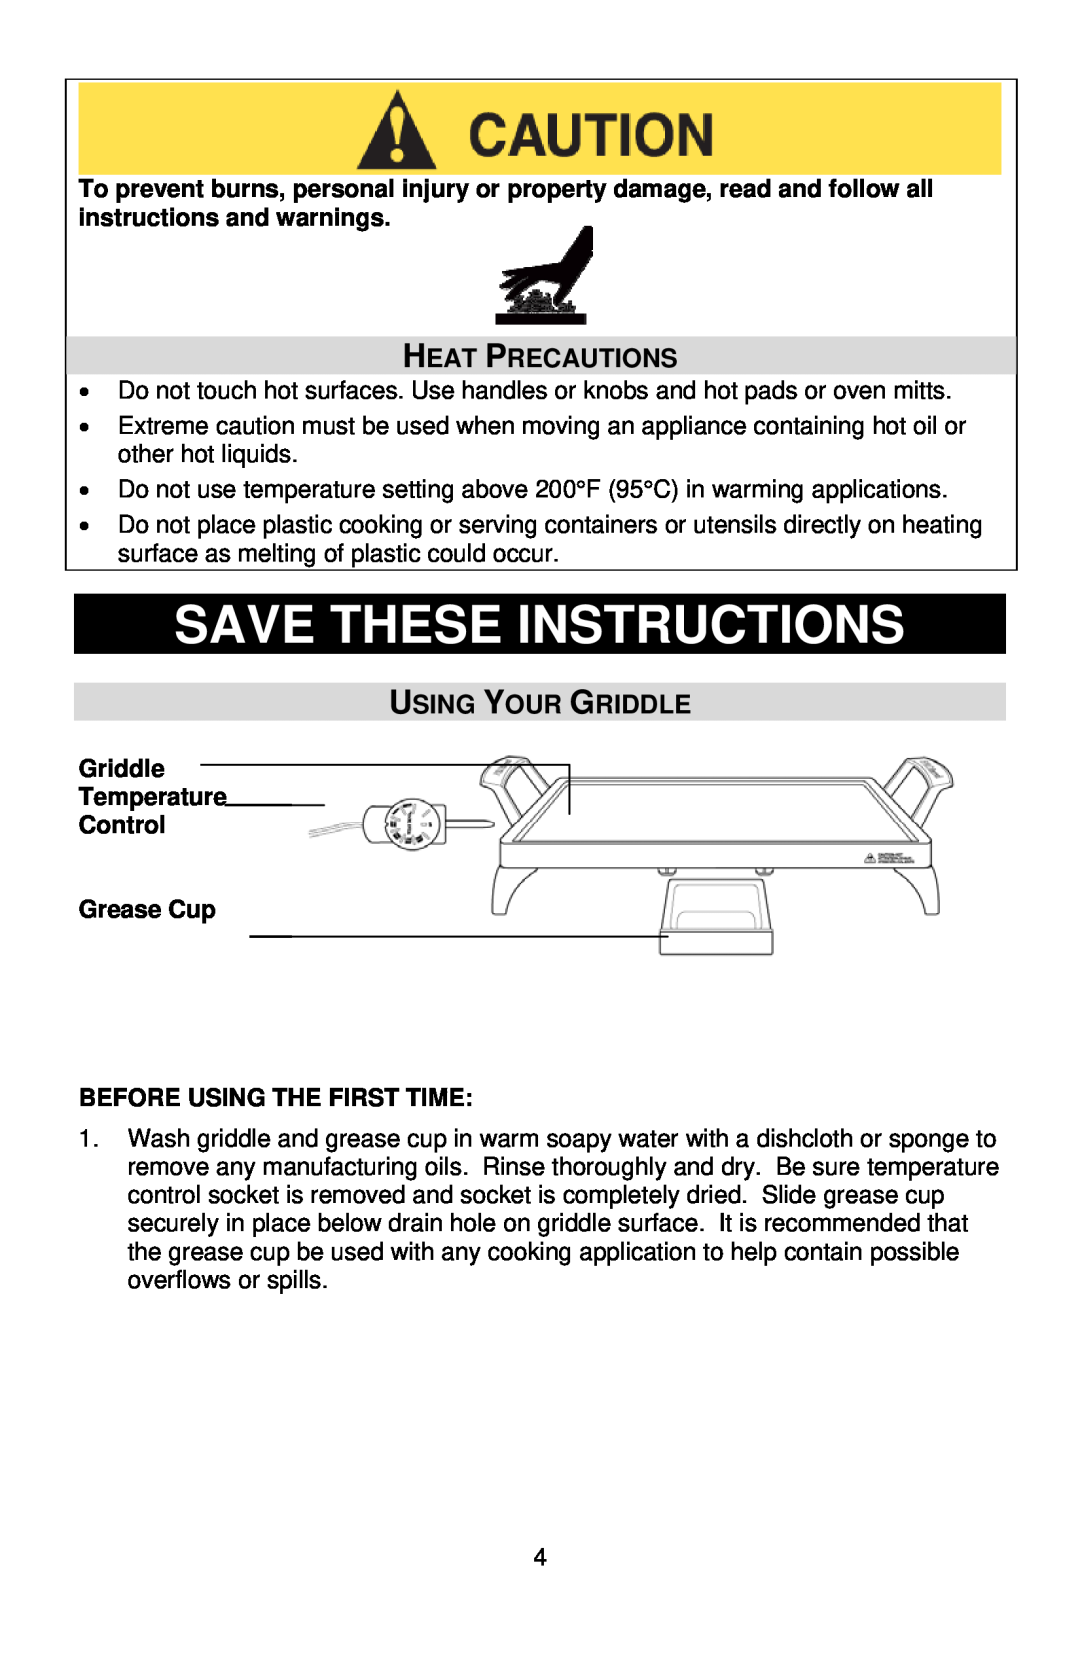 West Bend L5687 Save These Instructions, Heat Precautions, Using Your Griddle, Griddle Temperature Control Grease Cup 